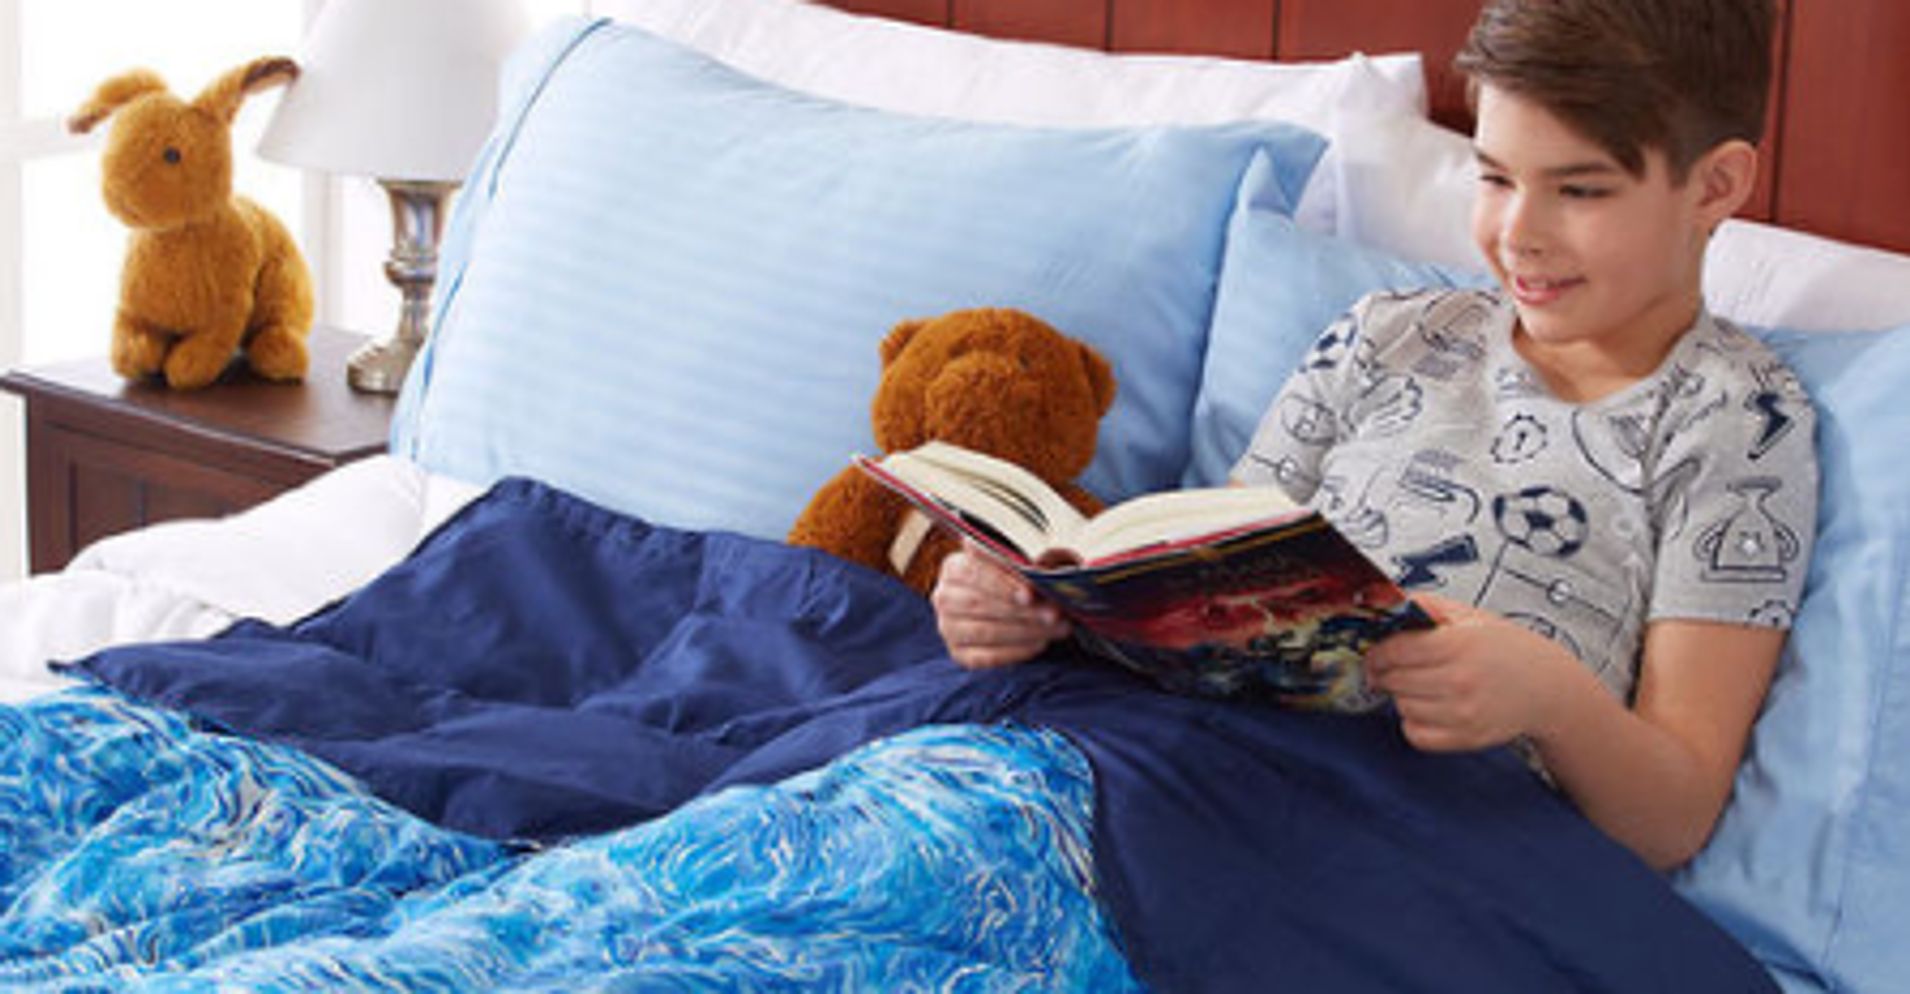 8 Weighted Blankets For Kids That'll Help Them Sleep Better | HuffPost